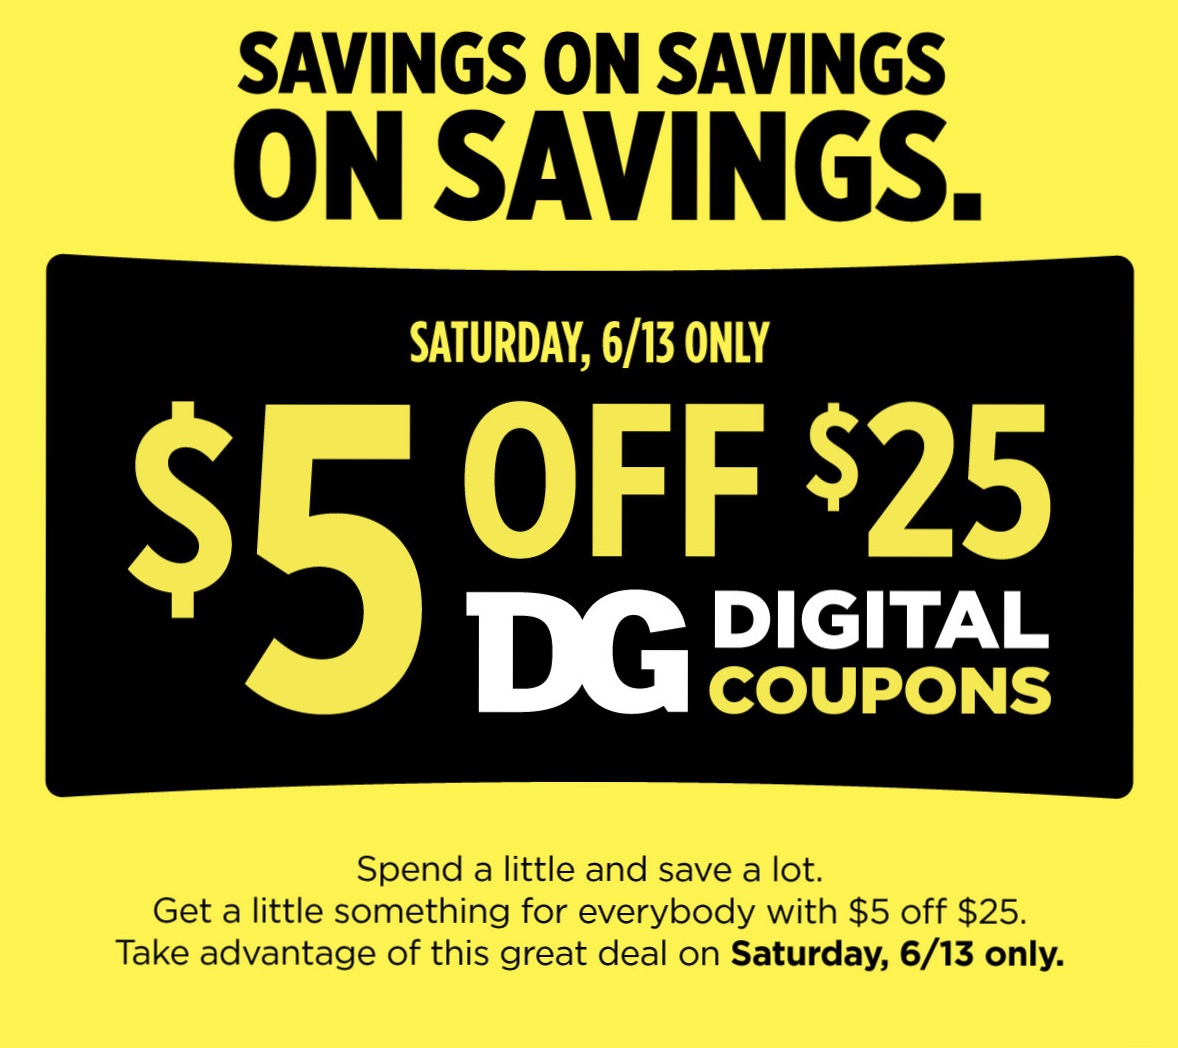 Today only! Dollar General Coupon